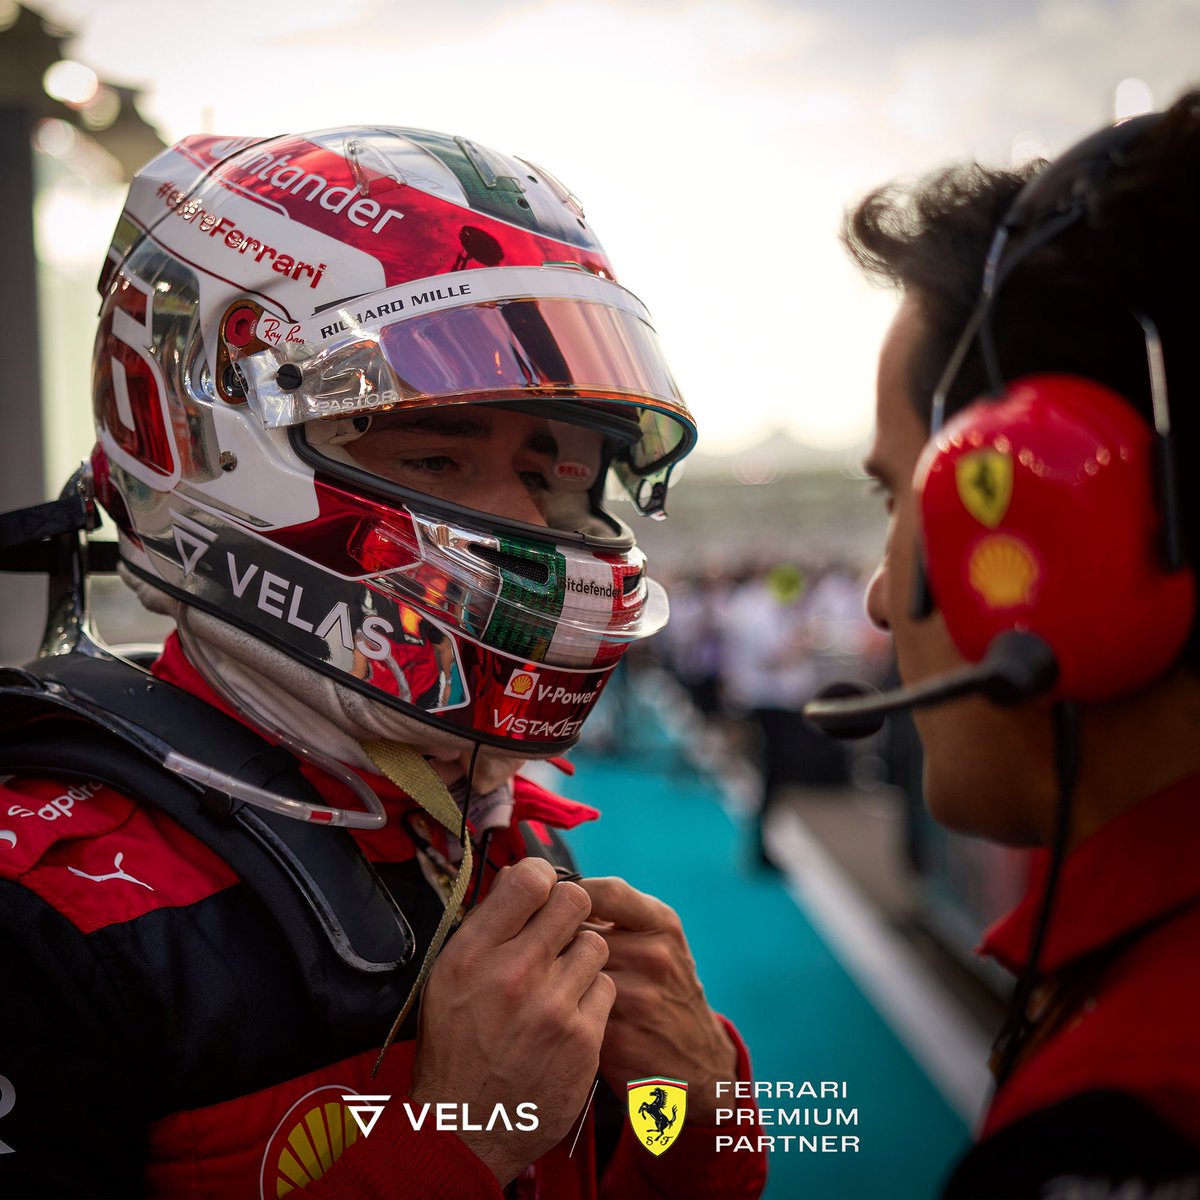 F1 teams are known for their cutting-edge technology and innovation, so it's no surprise that they're exploring the potential of blockchain. As popularity continues to grow, it’s likely that we’ll see even more crypto-based sponsors in F1 in the future. #ScuderiaFerrari #Velas